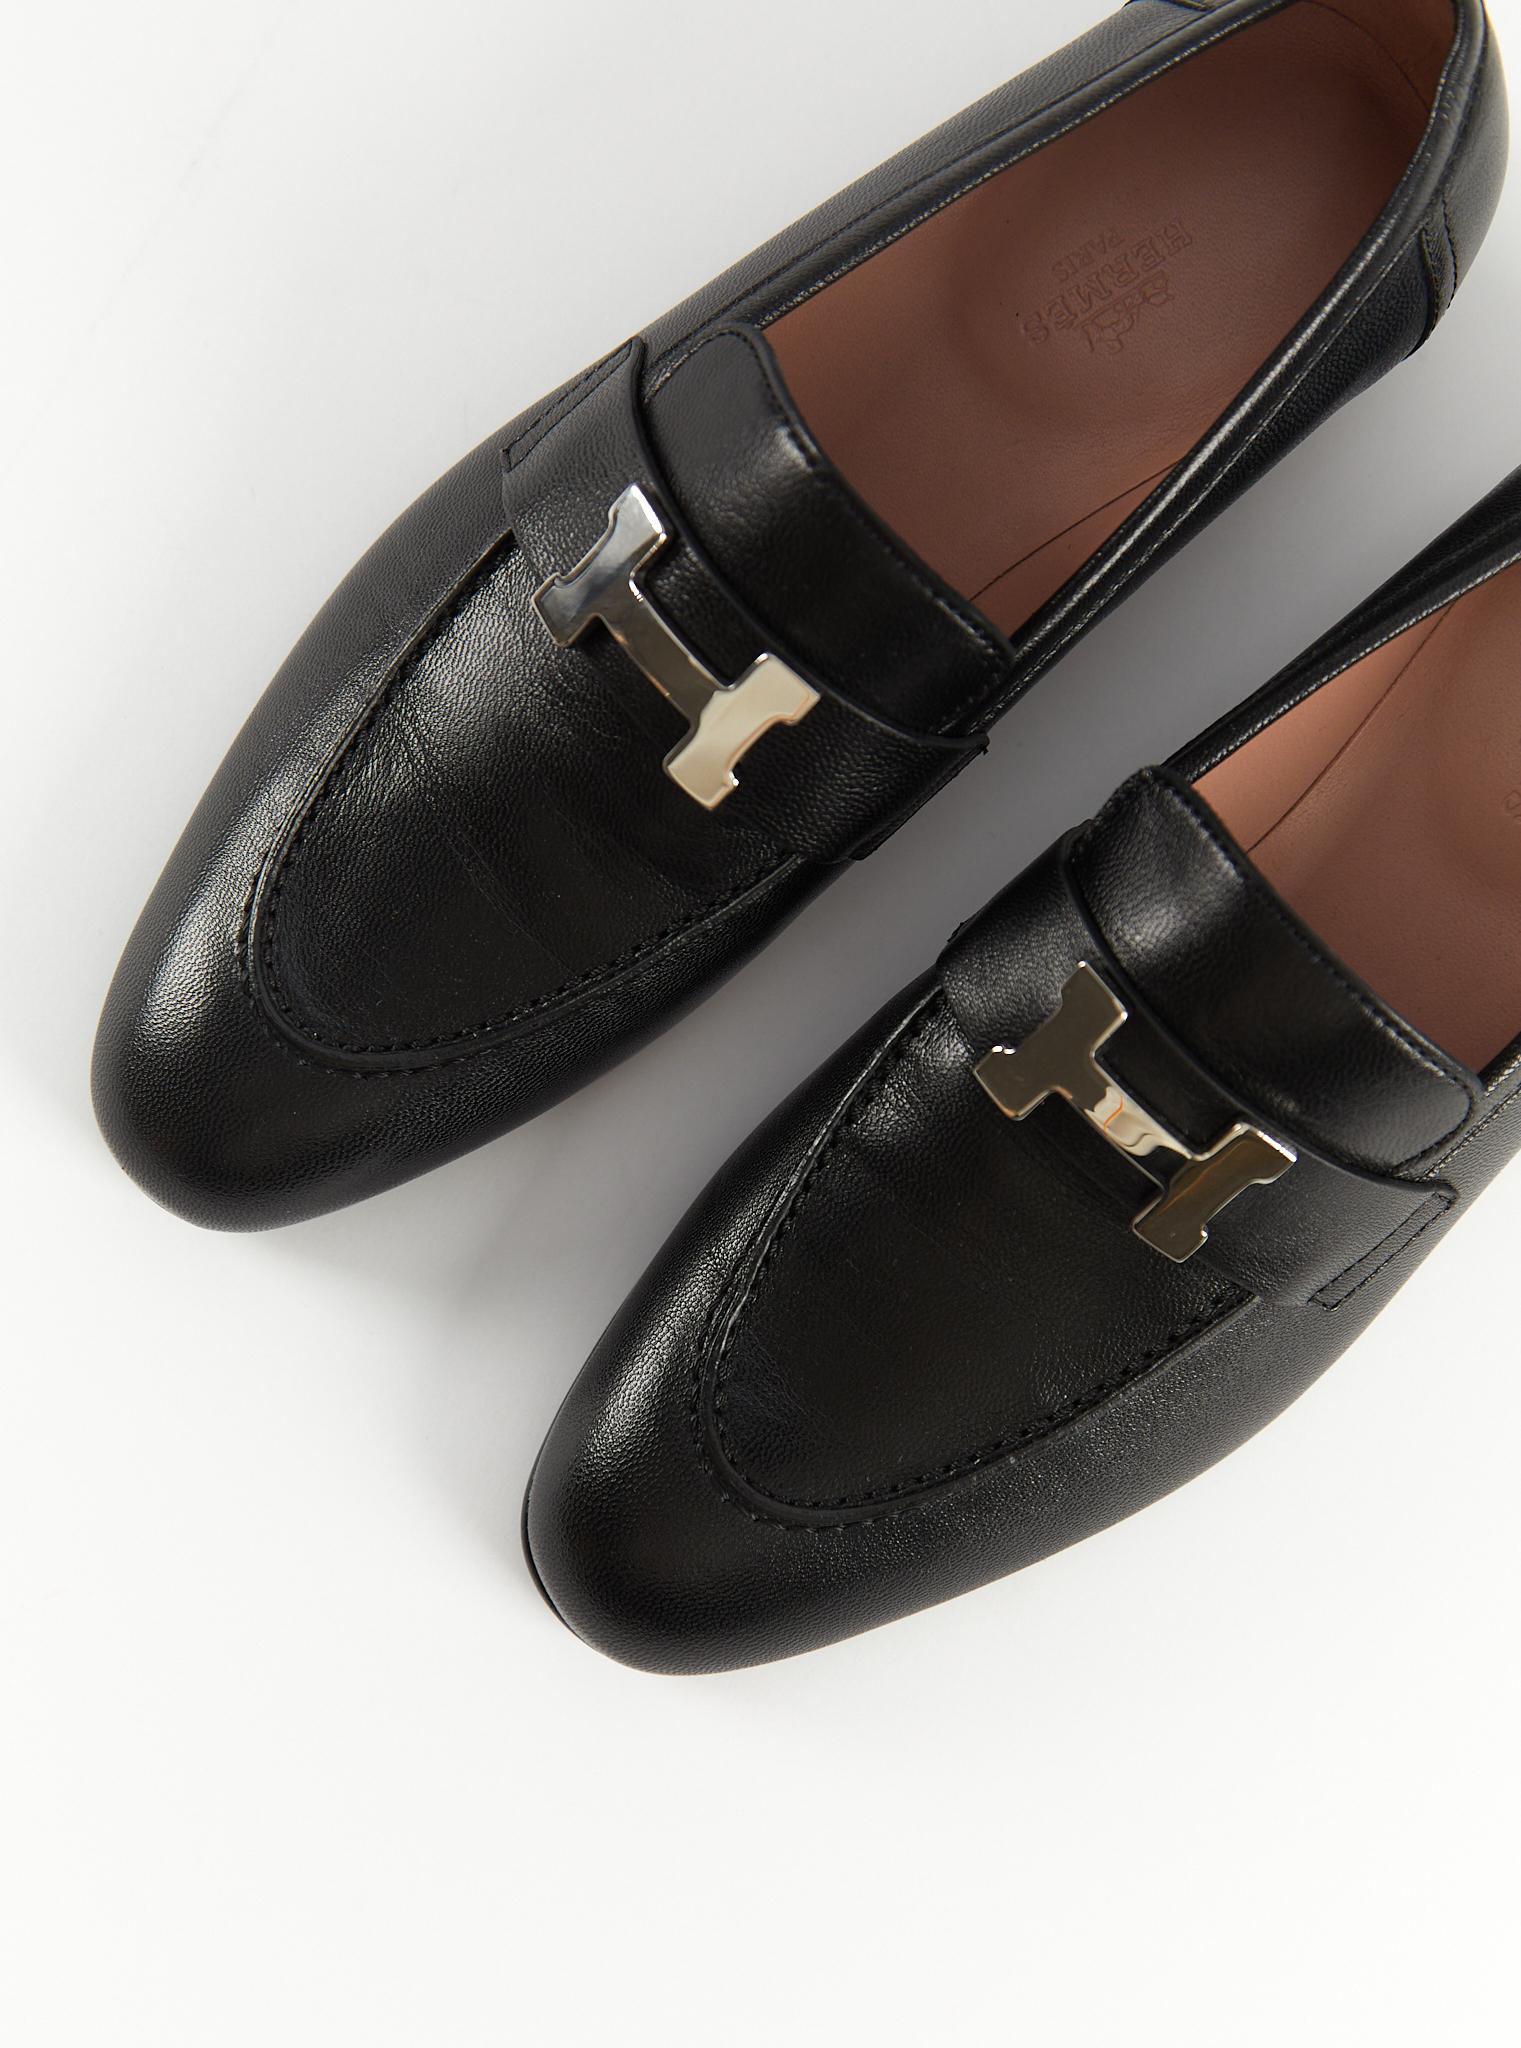 Hermès Paris Loafers in Black 

Goatskin Leather with Palladium Hardware 

Made in Italy

Size 37.5